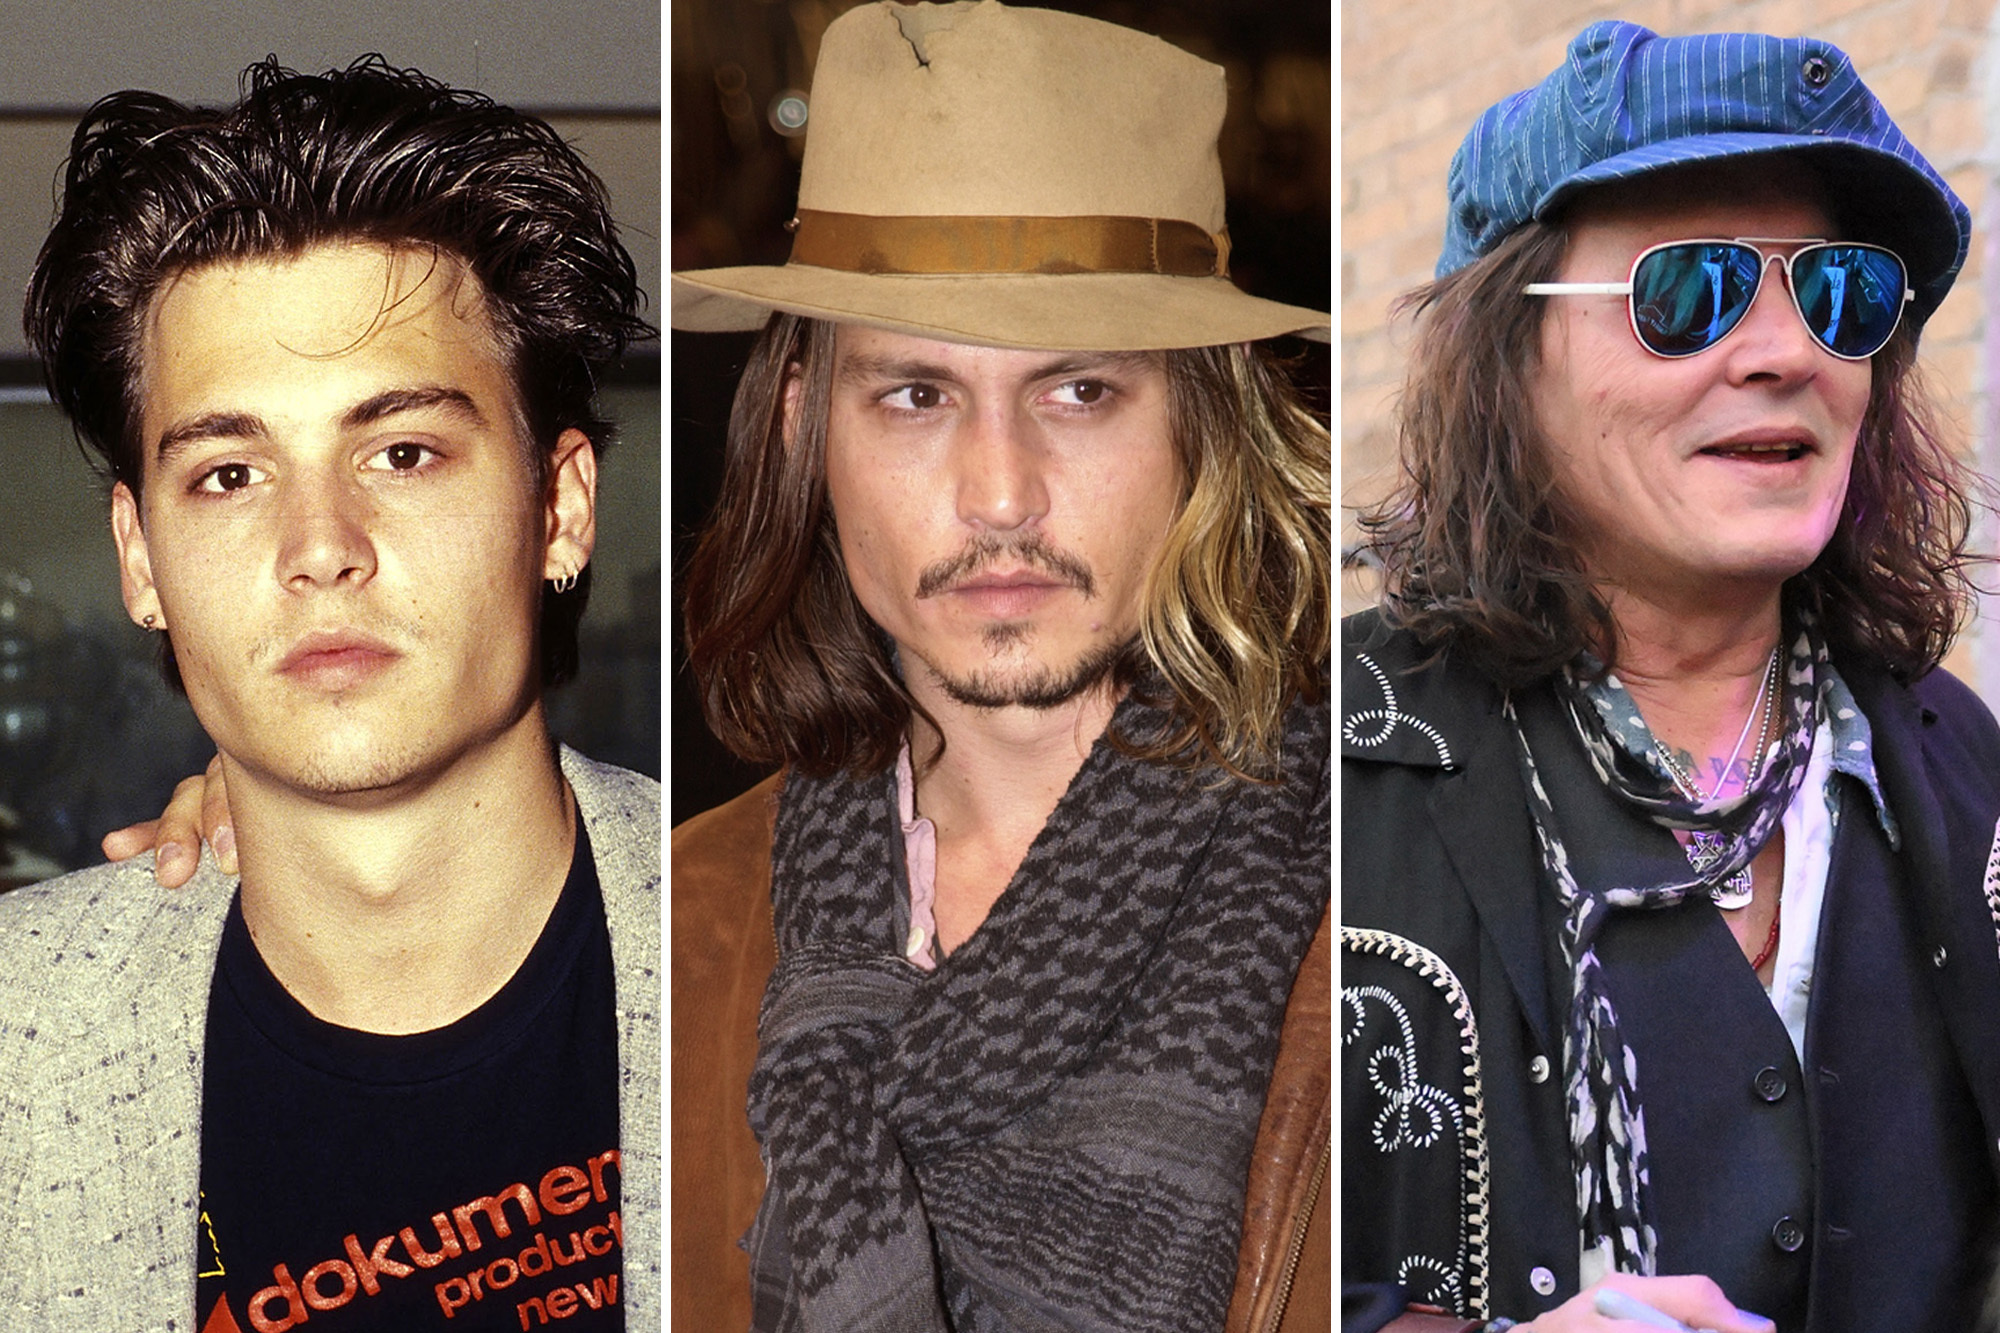 Johnny Depp through the years: The star's life in photos